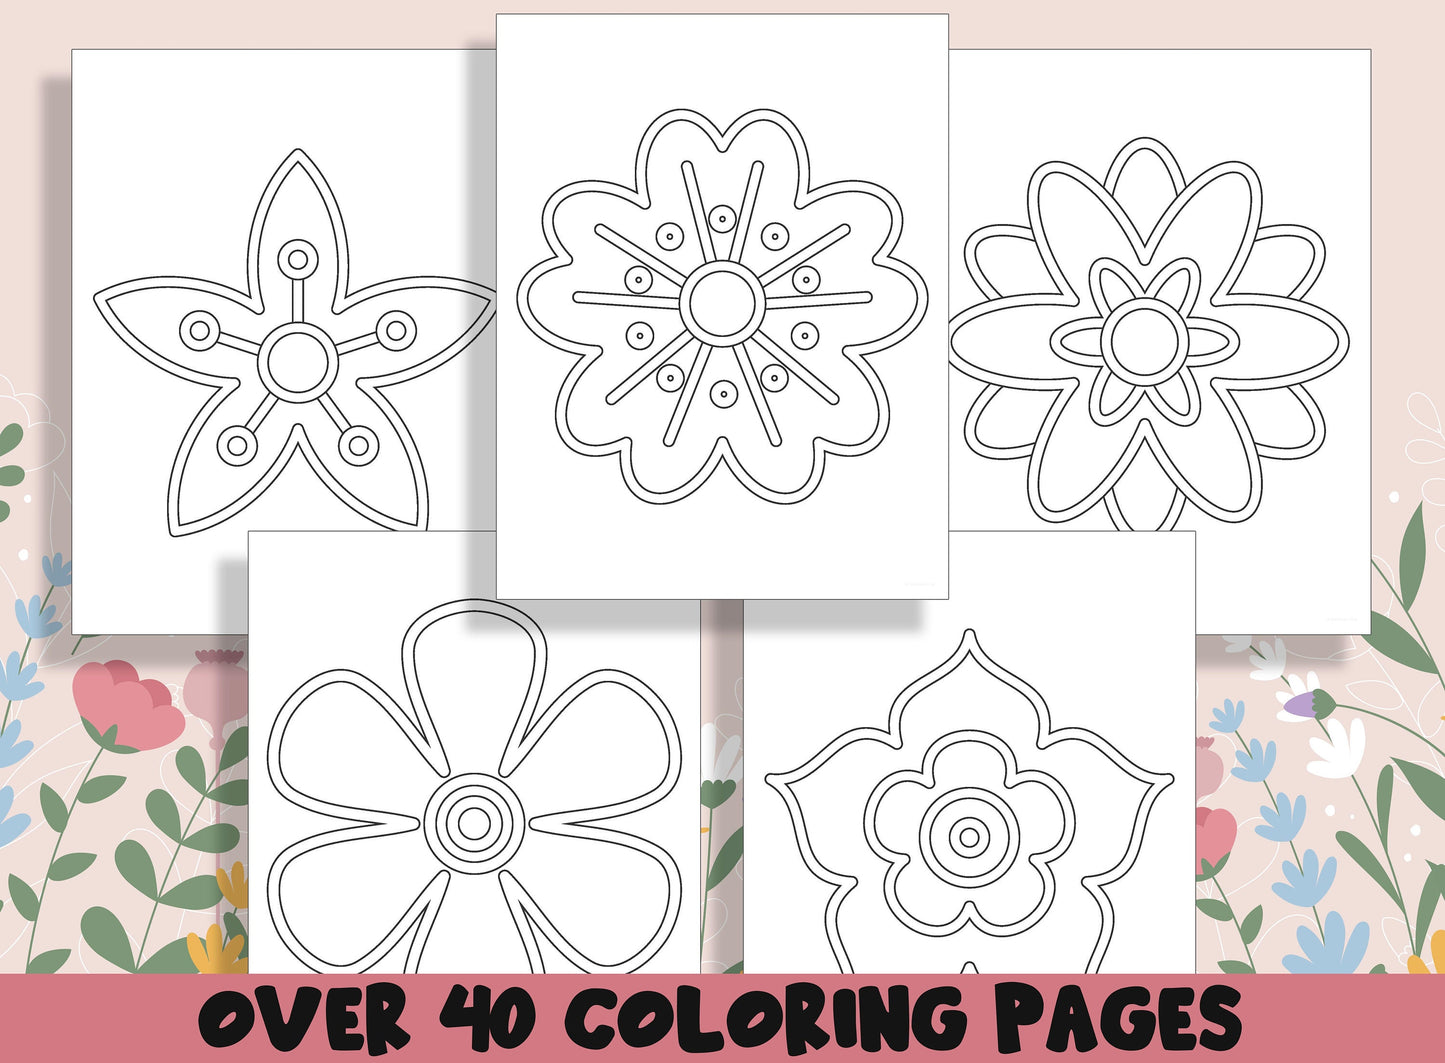 Flower Mandalas Coloring Book, 40 Printable Simple Spring Flower Coloring Pages for Kids, Teaching Materials, Stress Relief and Relaxation